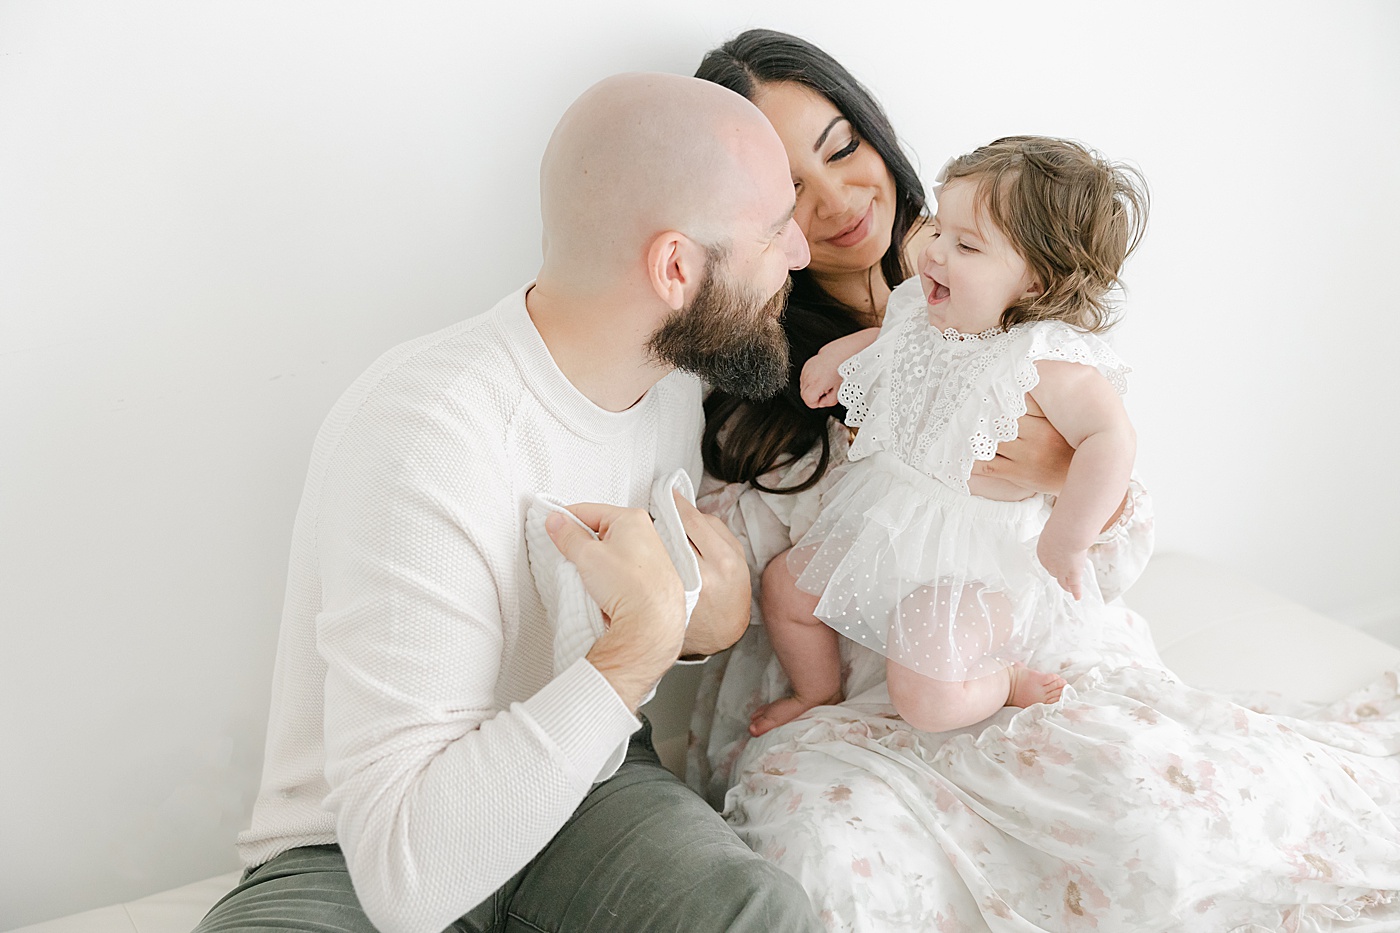 Family portraits during milestone photoshoot for 6 month old baby girl | Kristin Wood Photography